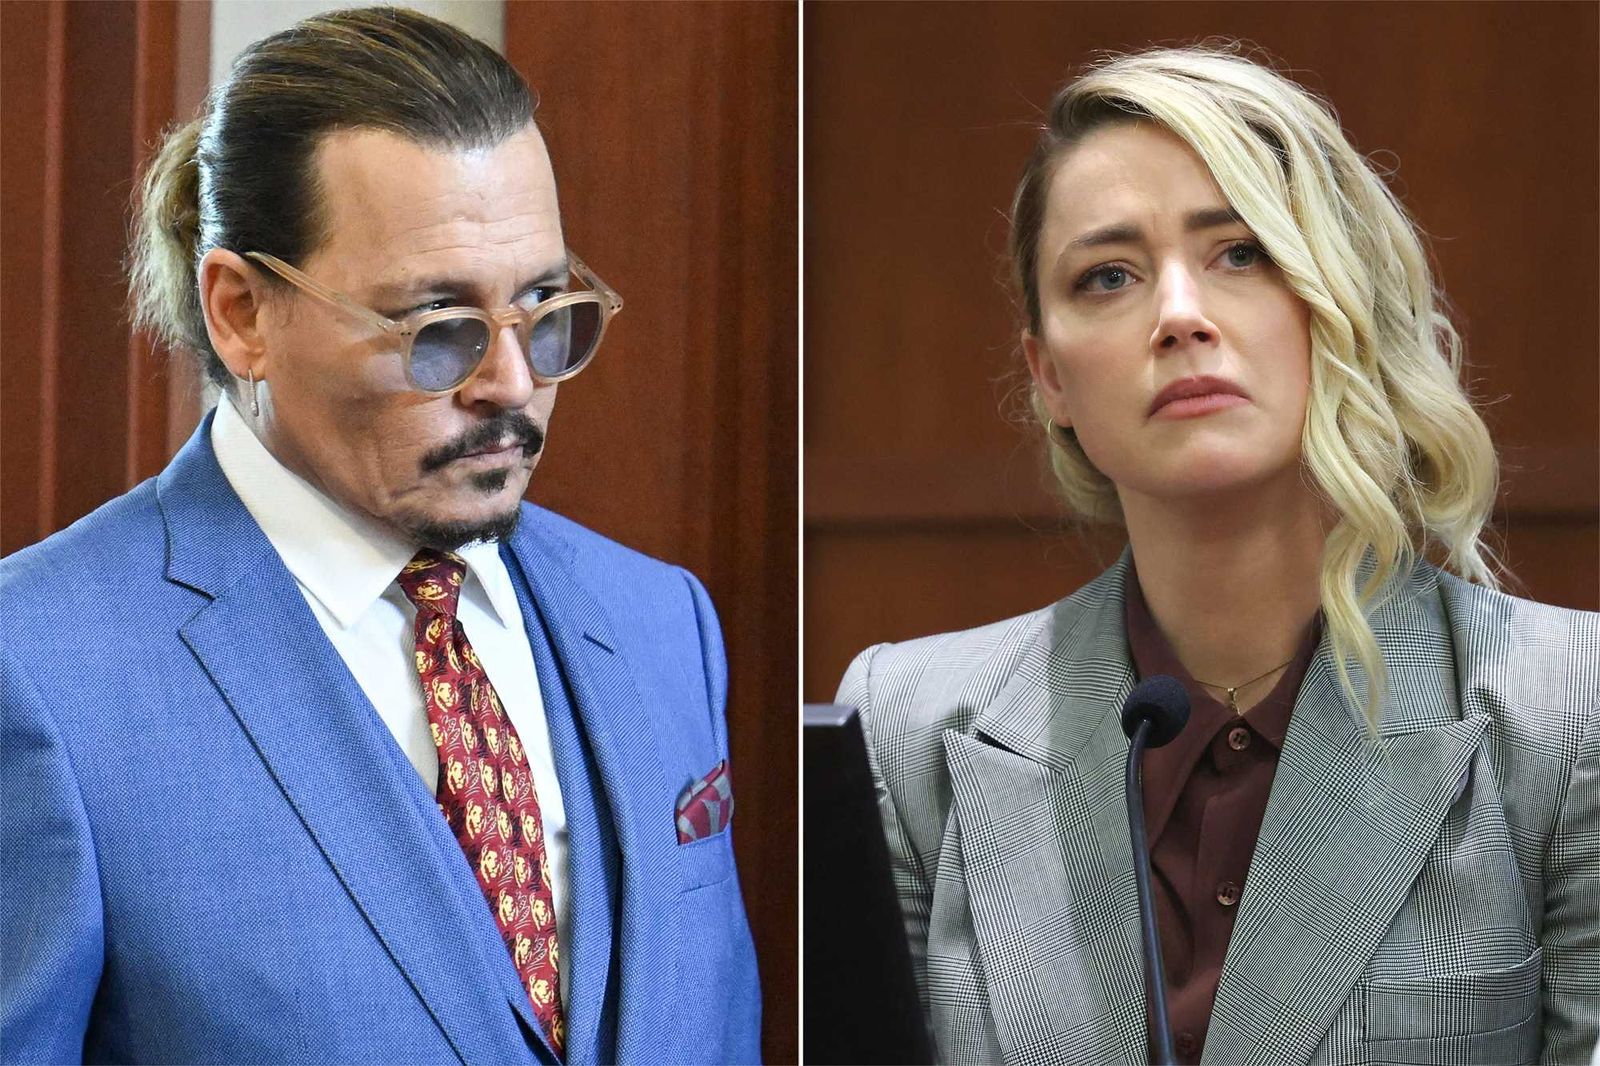 Amber Heard Heartbroken After Defamation Loss What This Means For Free Speech